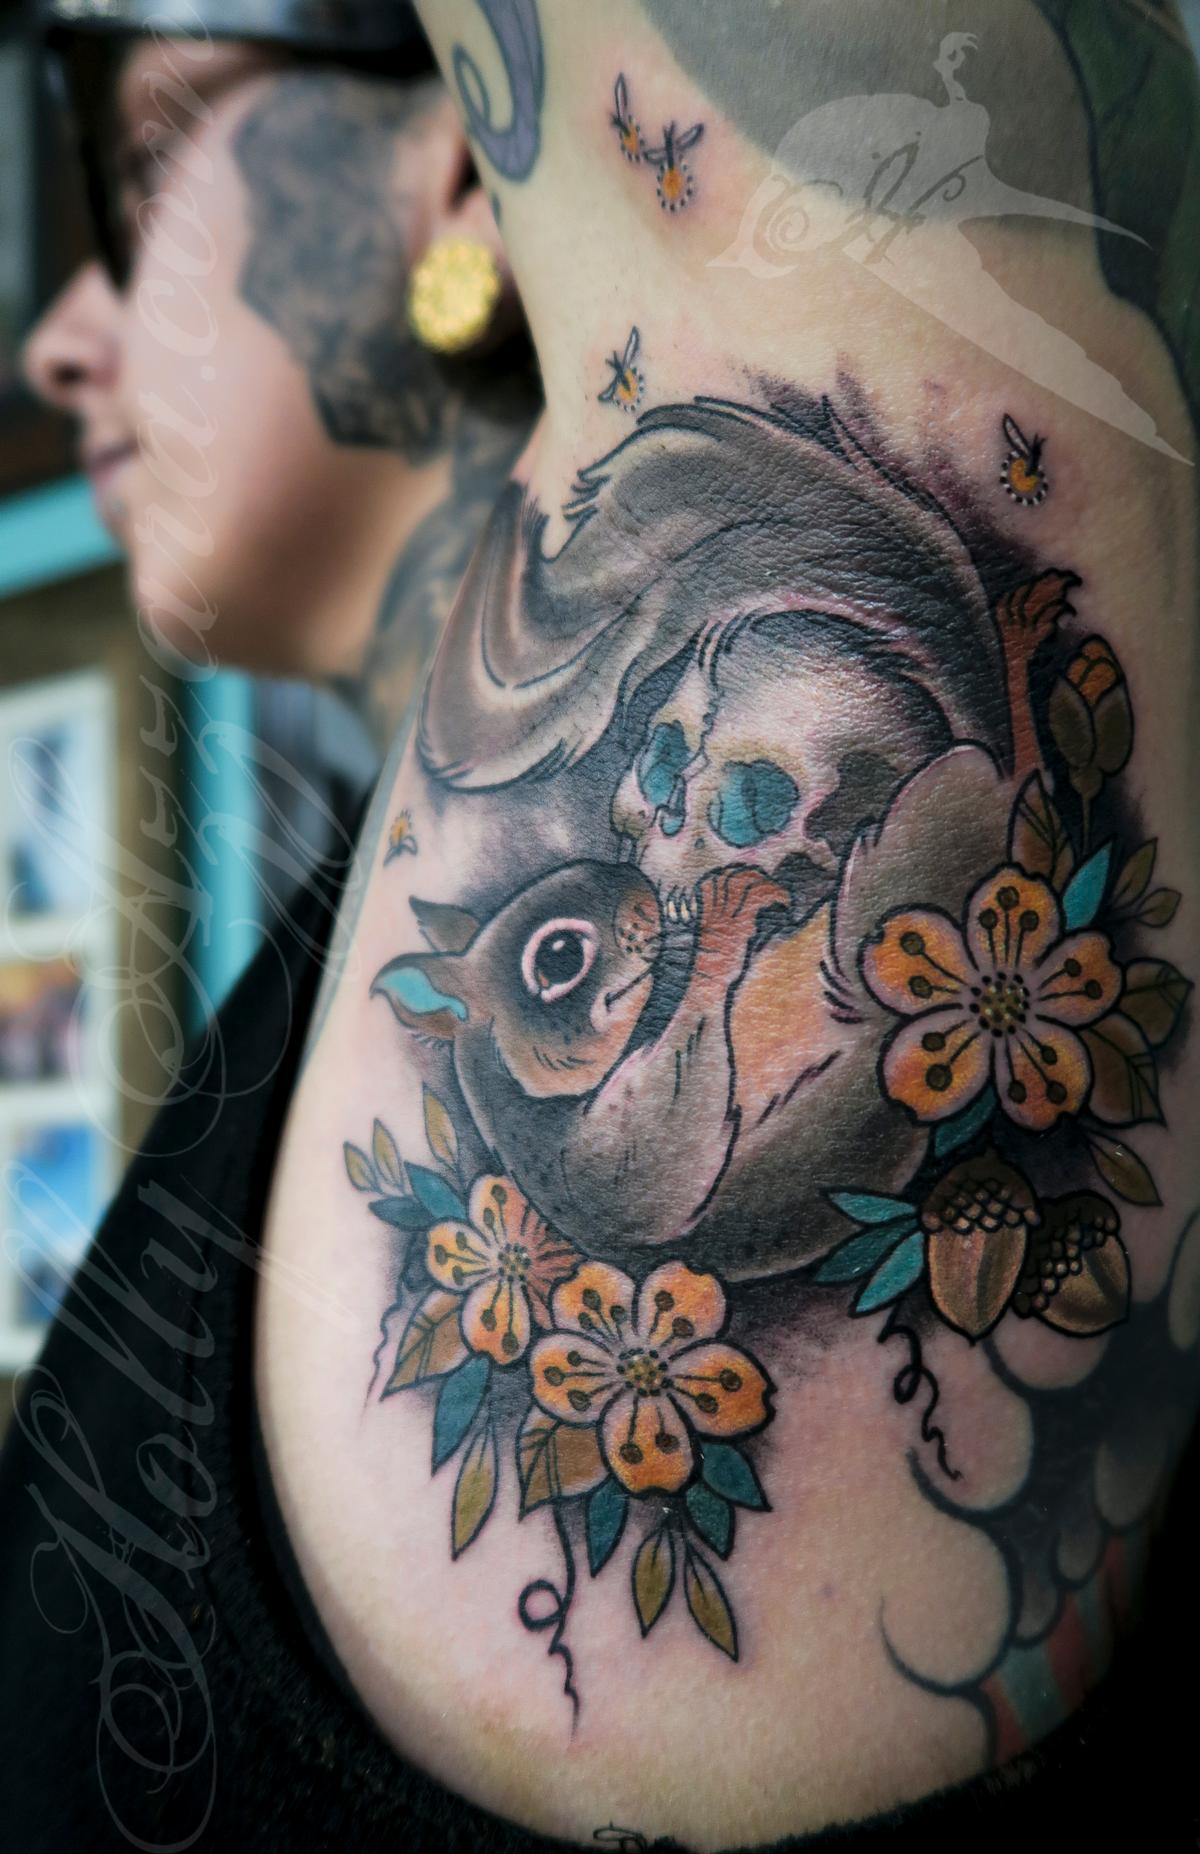 A squirrel becomes a masterpiece in this funky tattoo by Dynoz.Art.Attack |  Ratta Tattoo